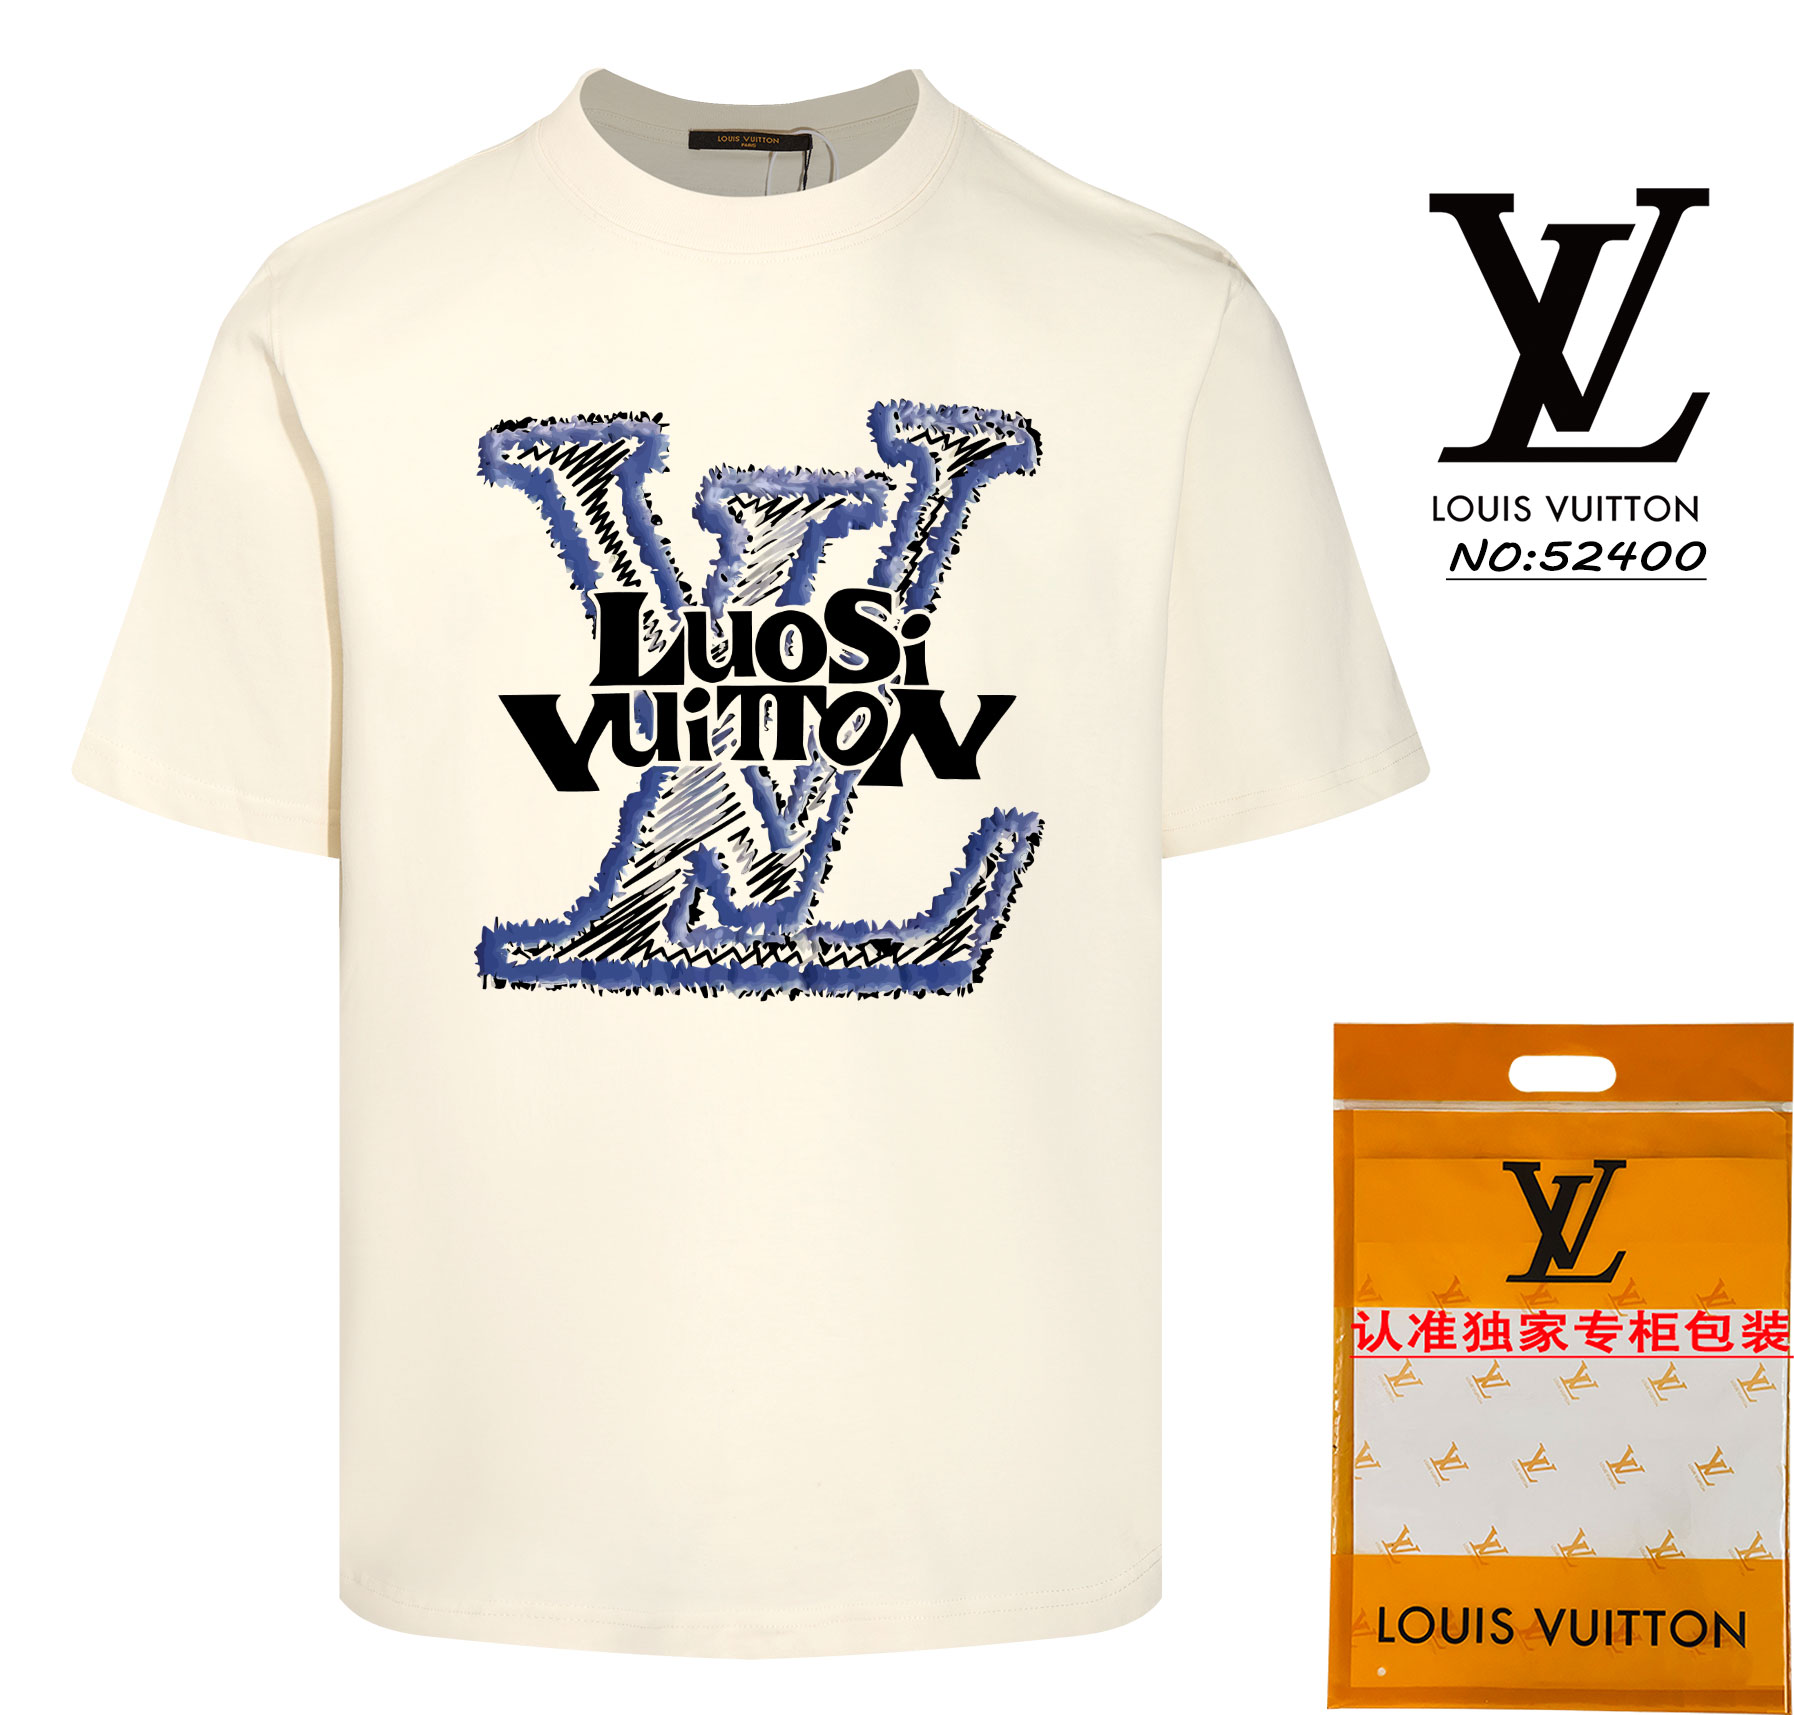 Louis Vuitton AAAAA+
 Clothing T-Shirt Apricot Color Black White Unisex Short Sleeve